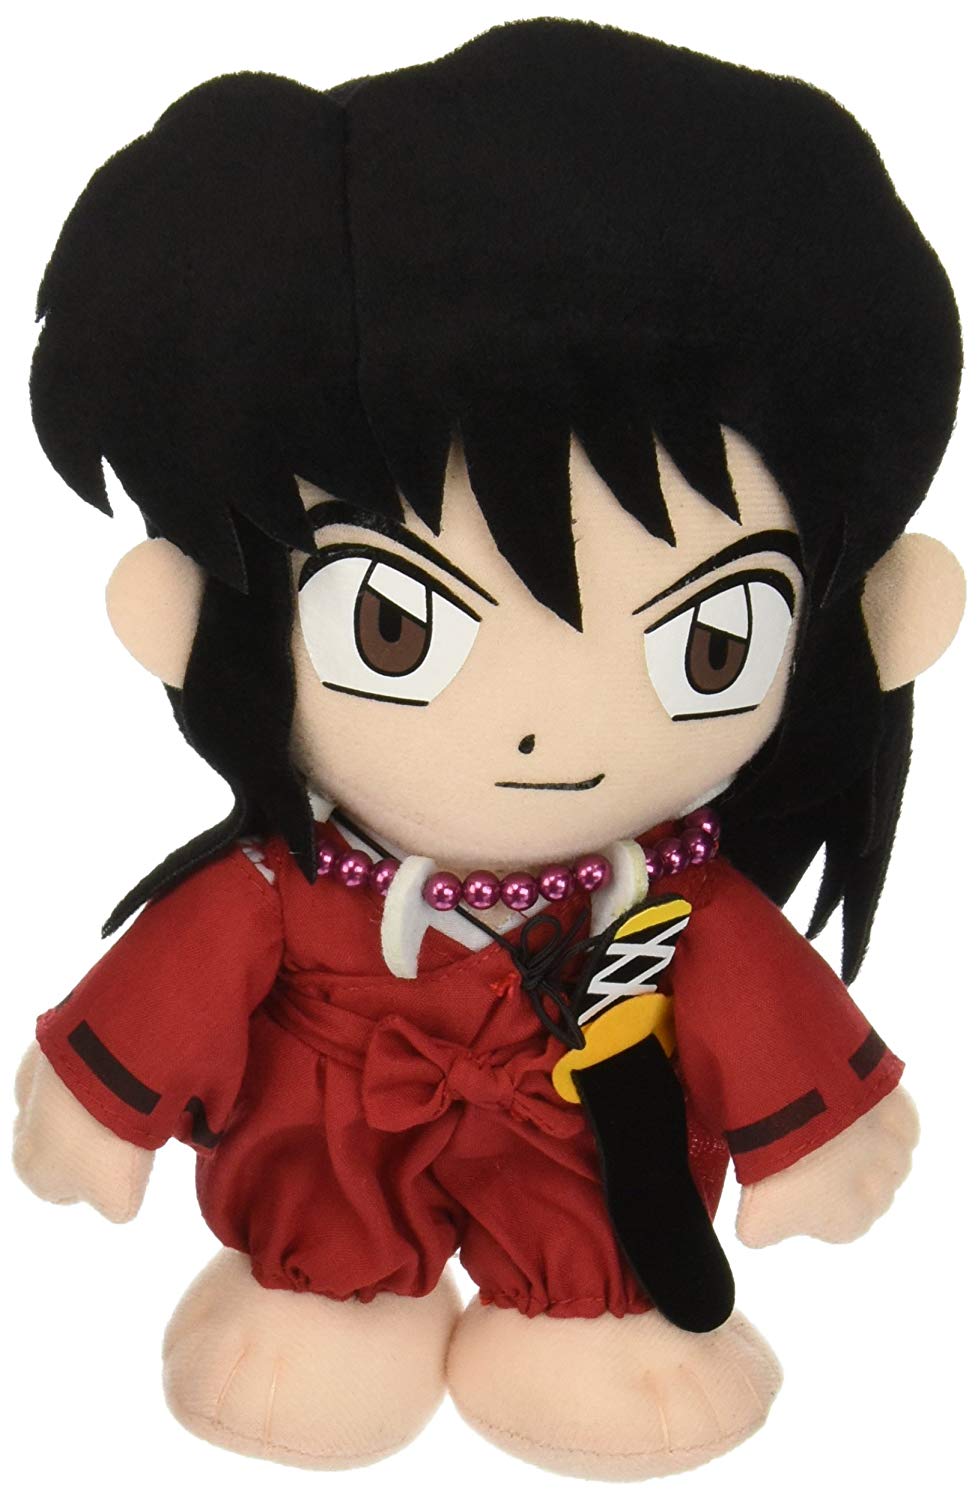 Great Eastern Inuyasha Human Form Plush Doll 9" - Super Anime Store FREE SHIPPING FAST SHIPPING USA